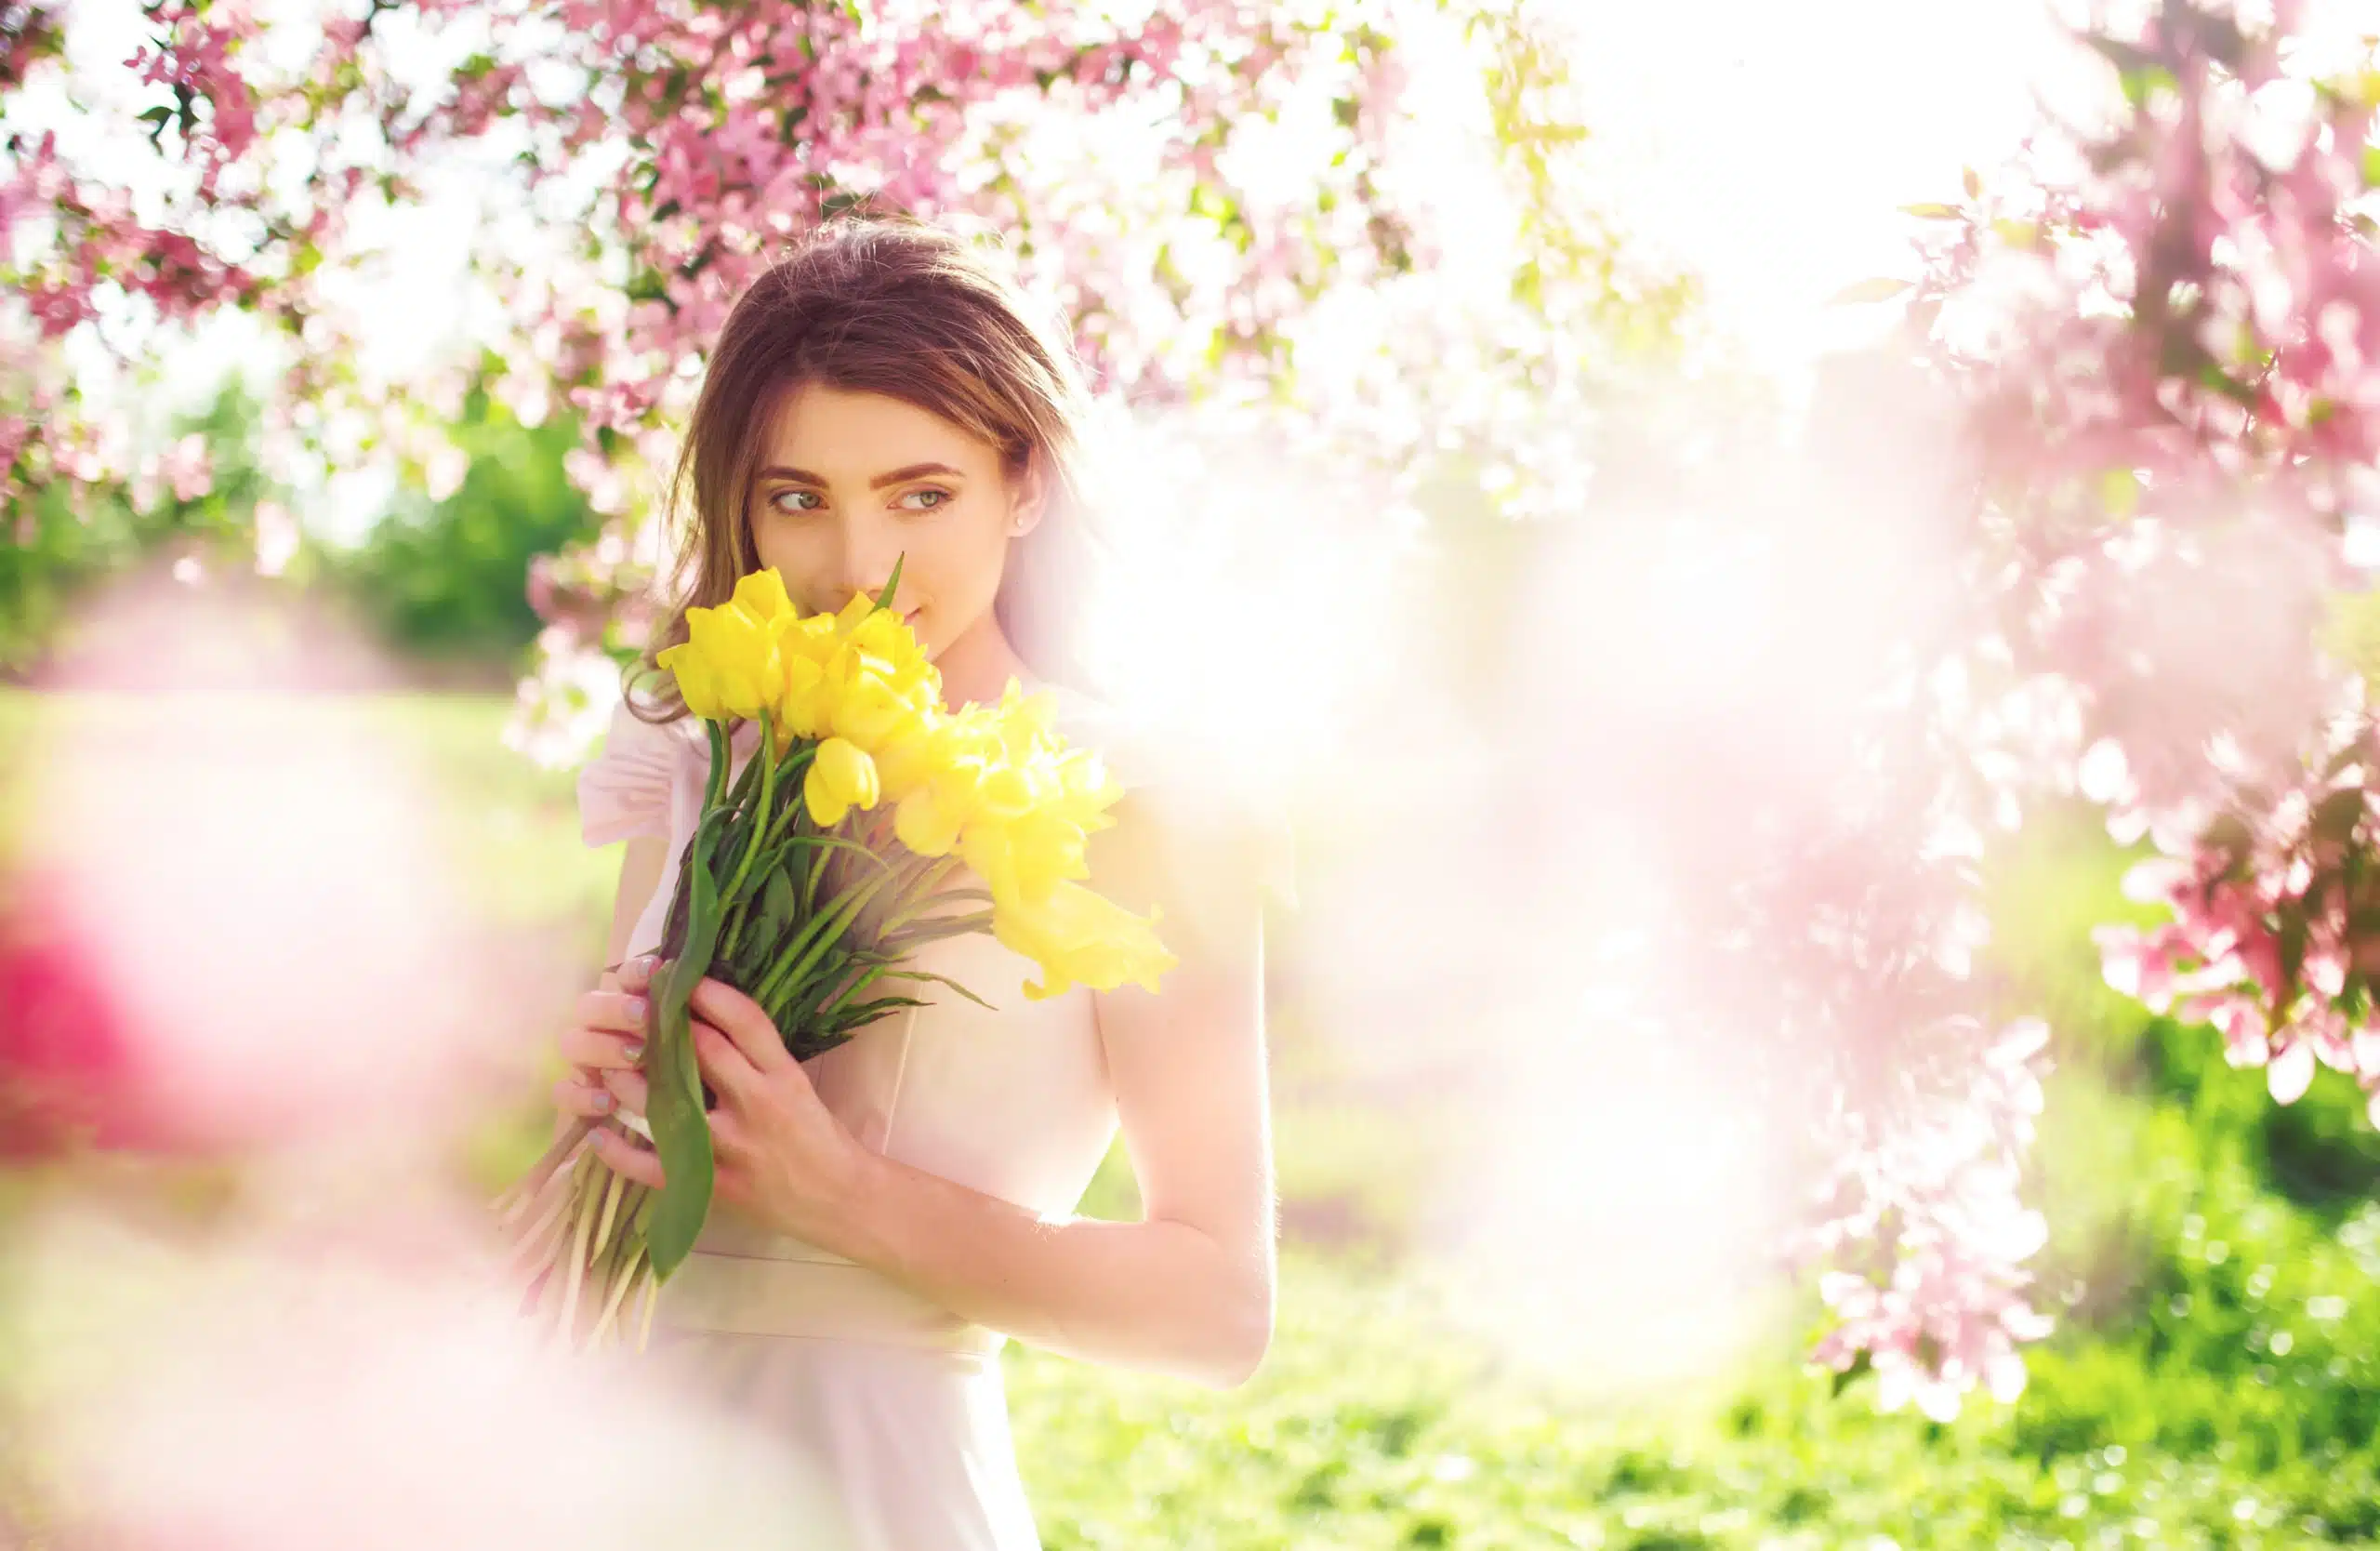 Beautiful young woman enjoying the flowers in spring.